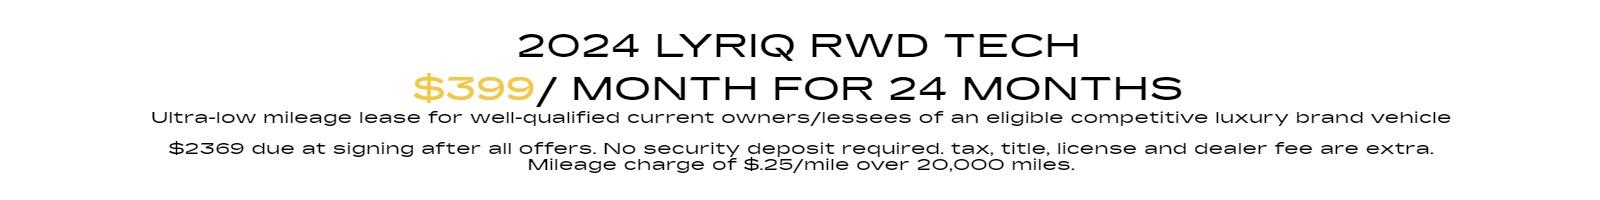 2024 Lyriq RWD Tech Ultra-low mileage lease for well-qualified current owners/lessees of an eligible competitive luxury brand vehicle $399 per month 24 months. $2369 due at signing after all offers. No security deposit required. tax, title, license and dealer fee are extra. Mileage charge of $.25/mile over 20,000 miles.